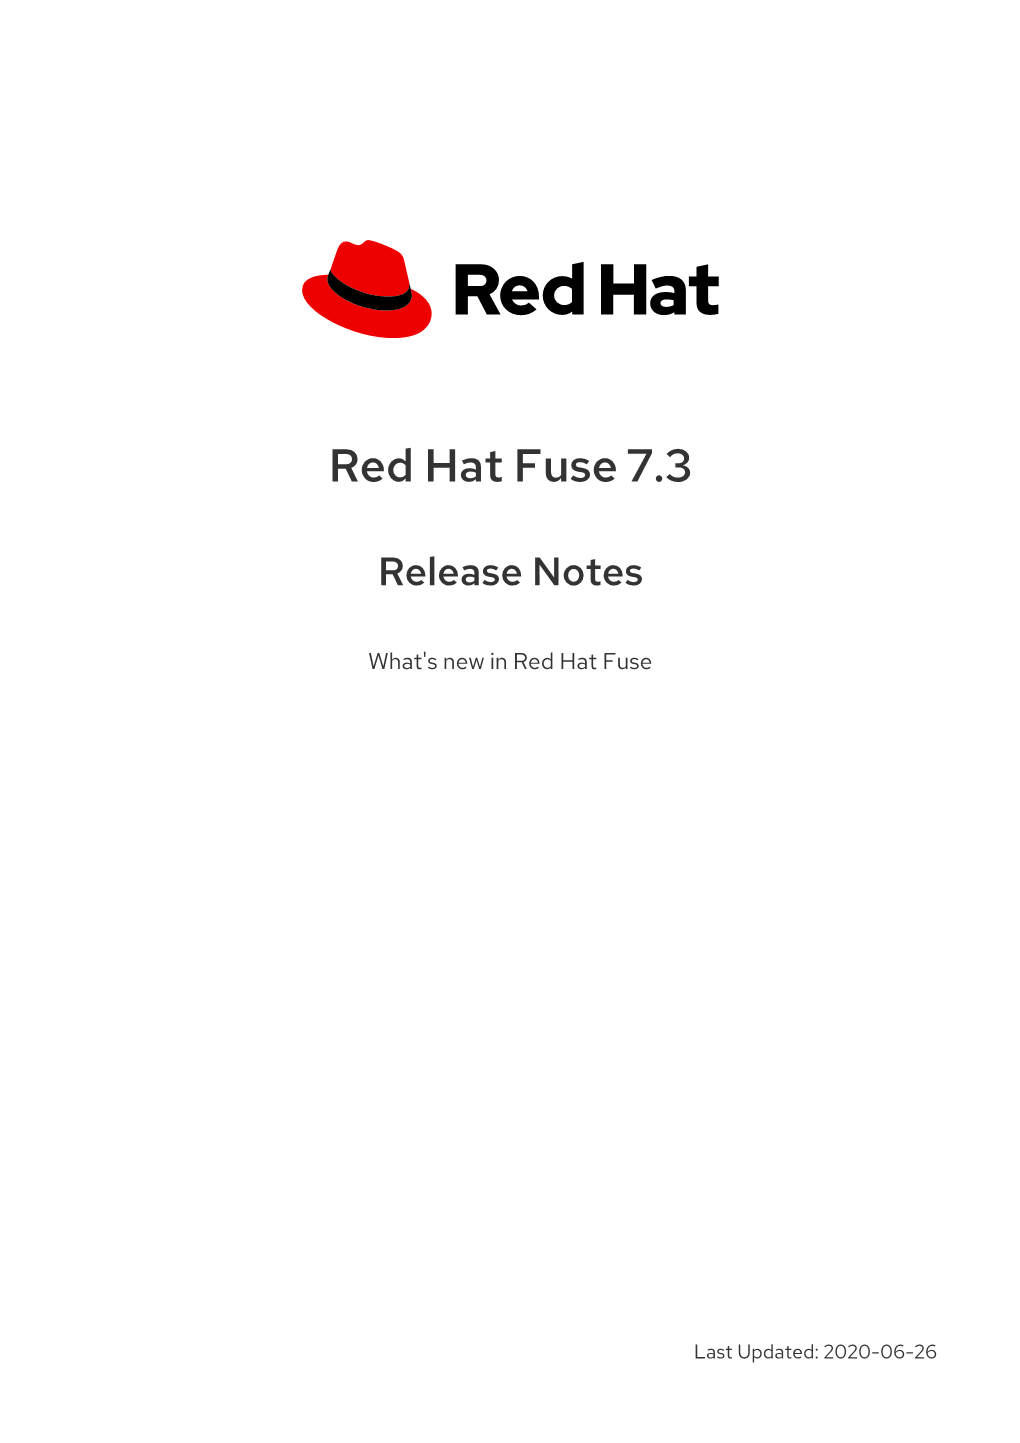 Red Hat Fuse 7.3 Release Notes